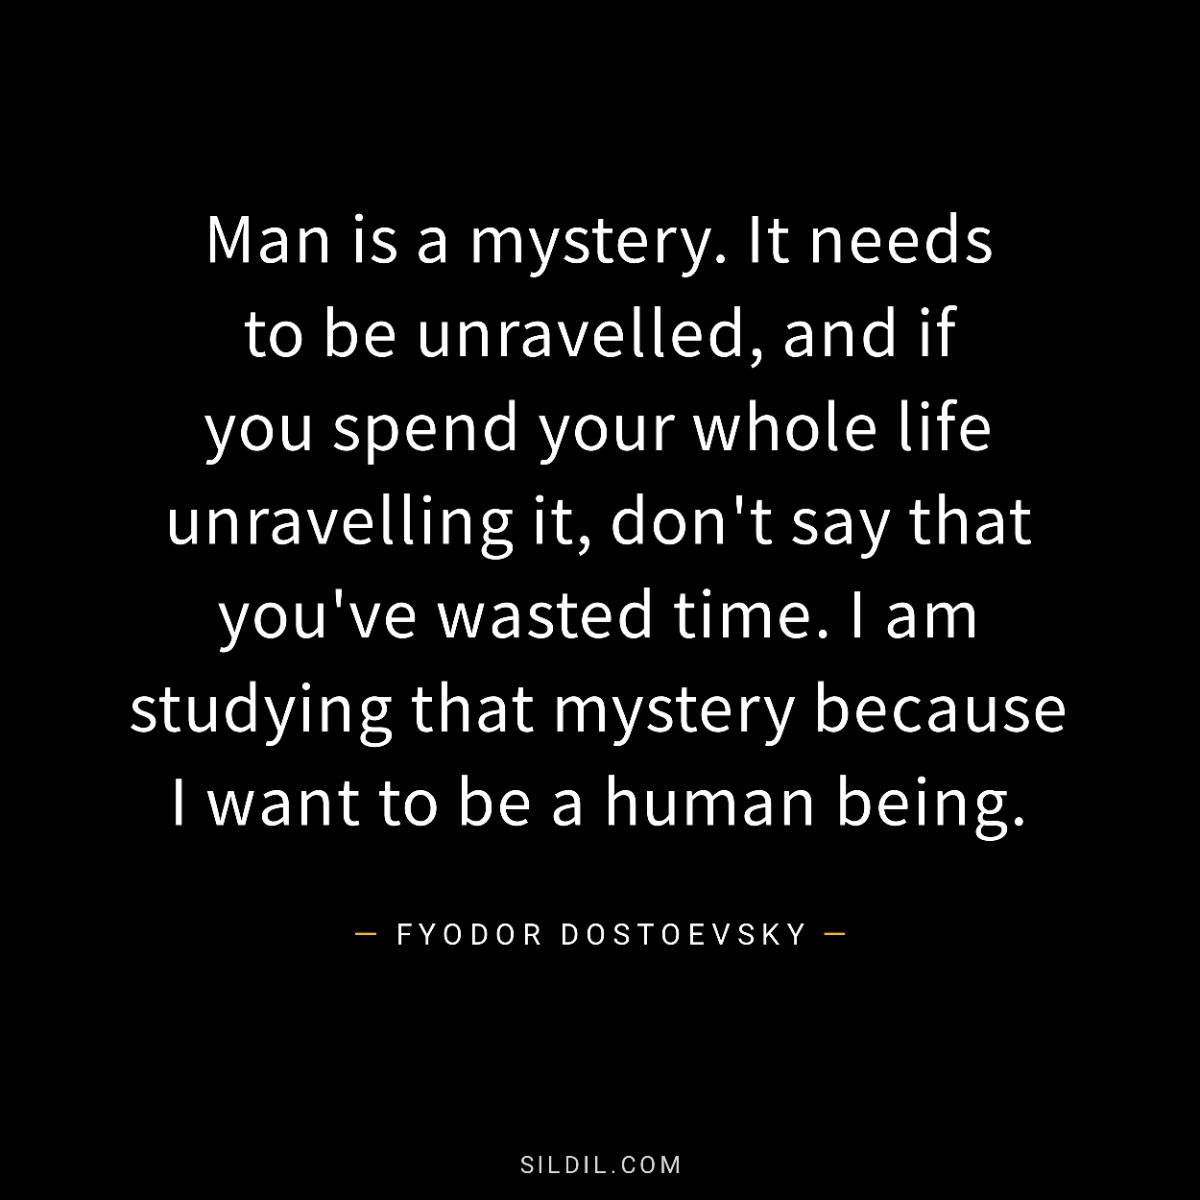 Man is a mystery. It needs to be unravelled, and if you spend your whole life unravelling it, don't say that you've wasted time. I am studying that mystery because I want to be a human being.